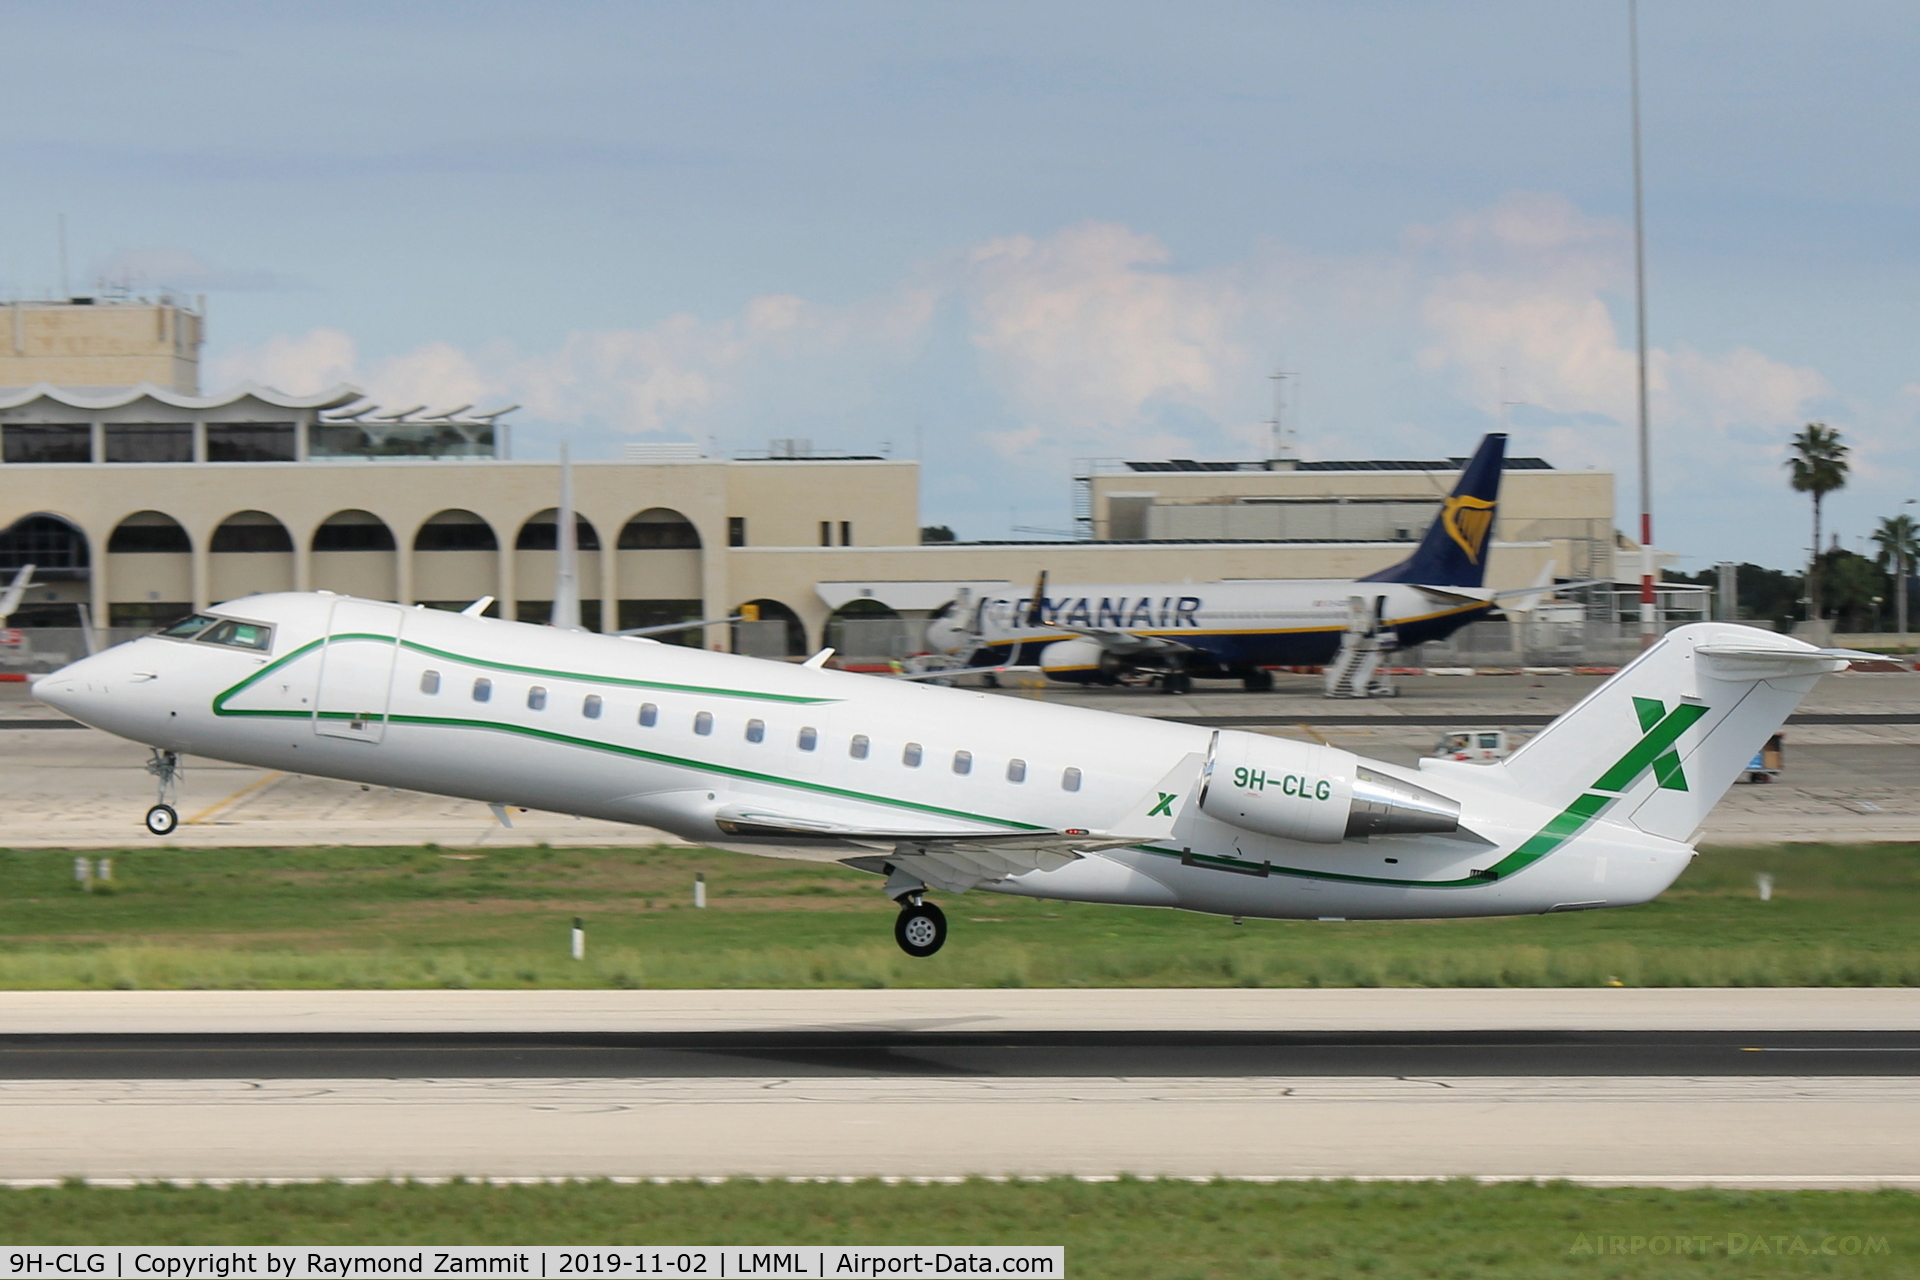 9H-CLG, 2006 Bombardier Challenger 850 (CL-600-2B19) C/N 8063, Bombardier Challenger 850 9H-CLG Air X